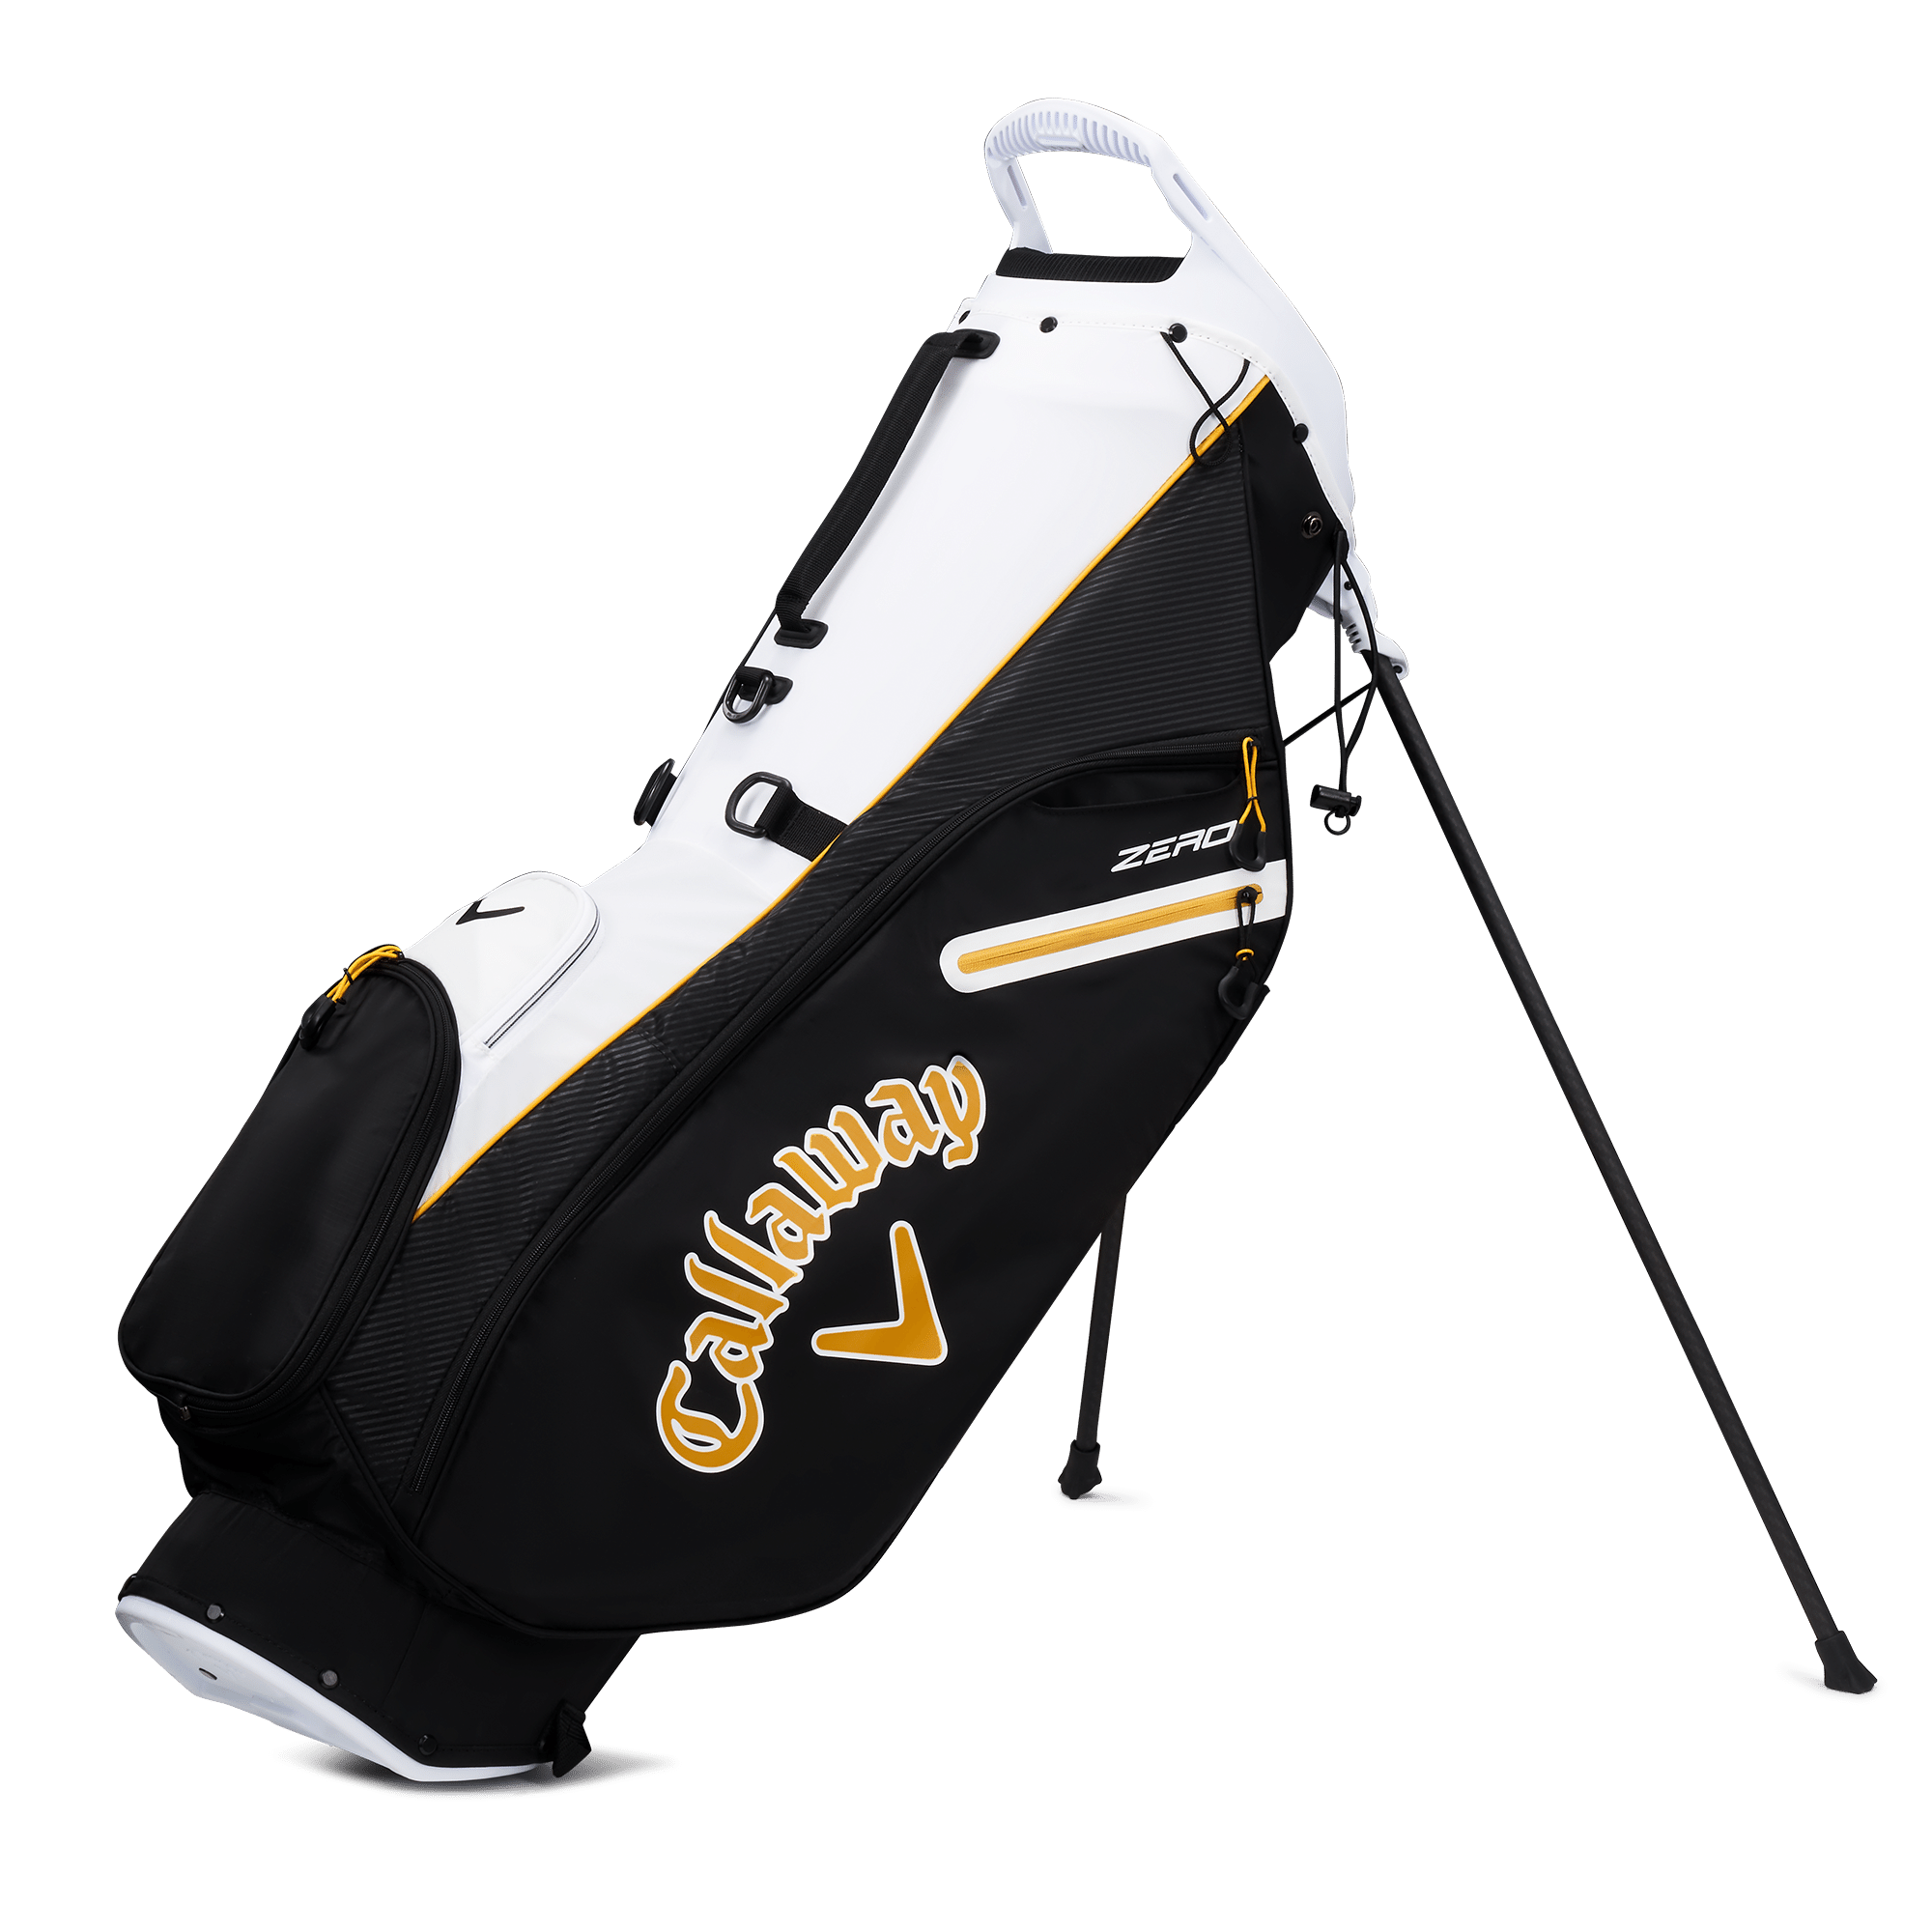 Womens Golf Bags  Curbside Pickup Available at DICKS